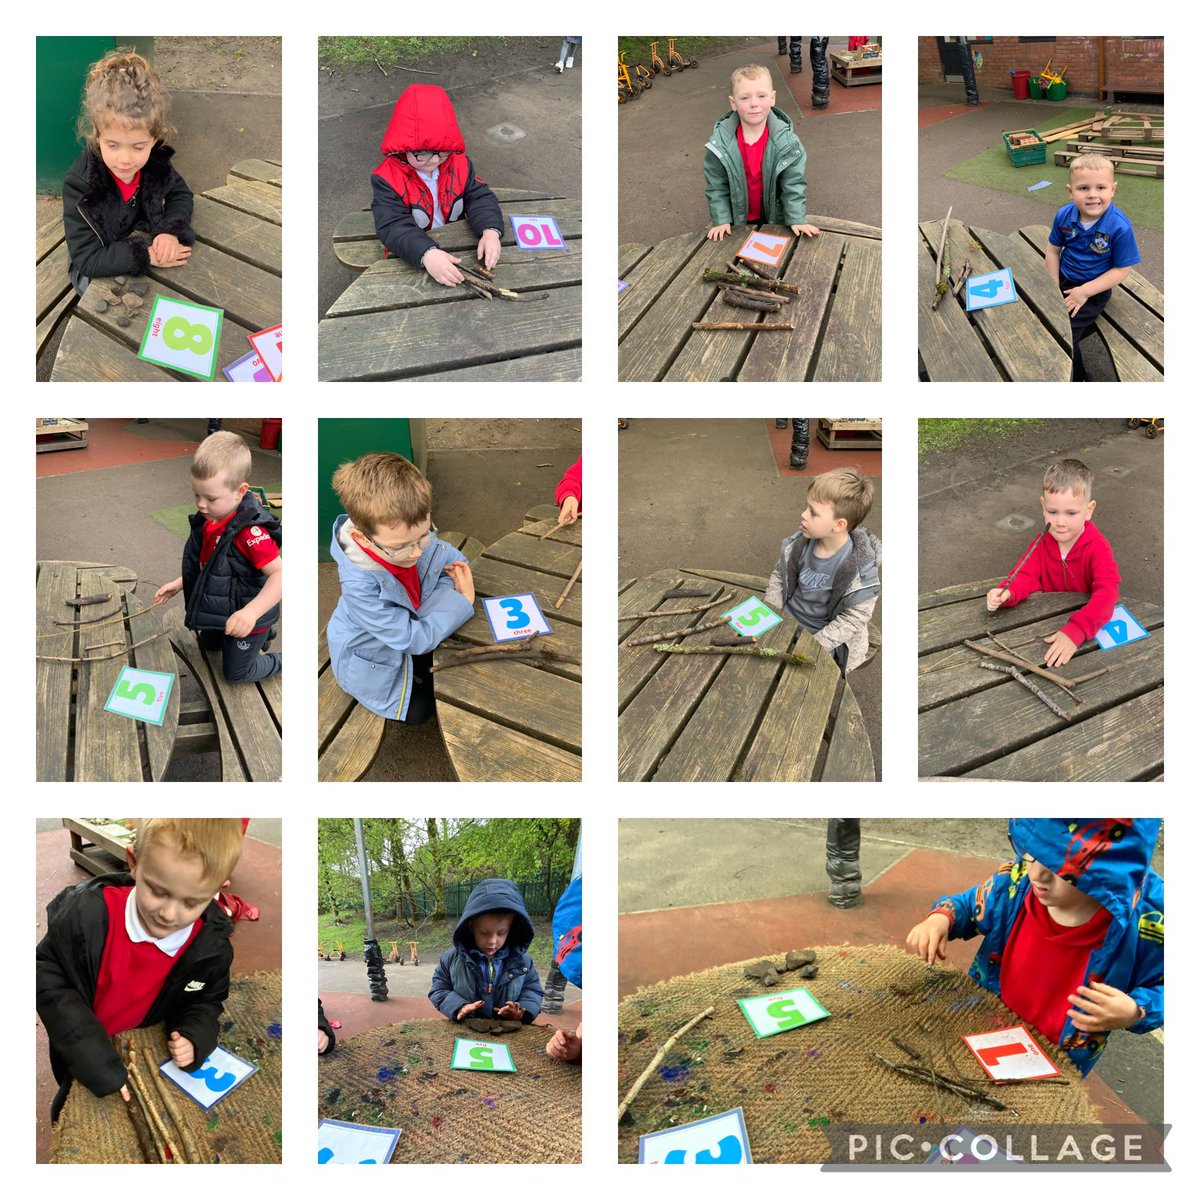 Pupils in Reception enjoyed working outdoors during their Maths lesson. They collect natural objects to help with number recognition and counting 🪵🌱🌺 @NantYParcSchool